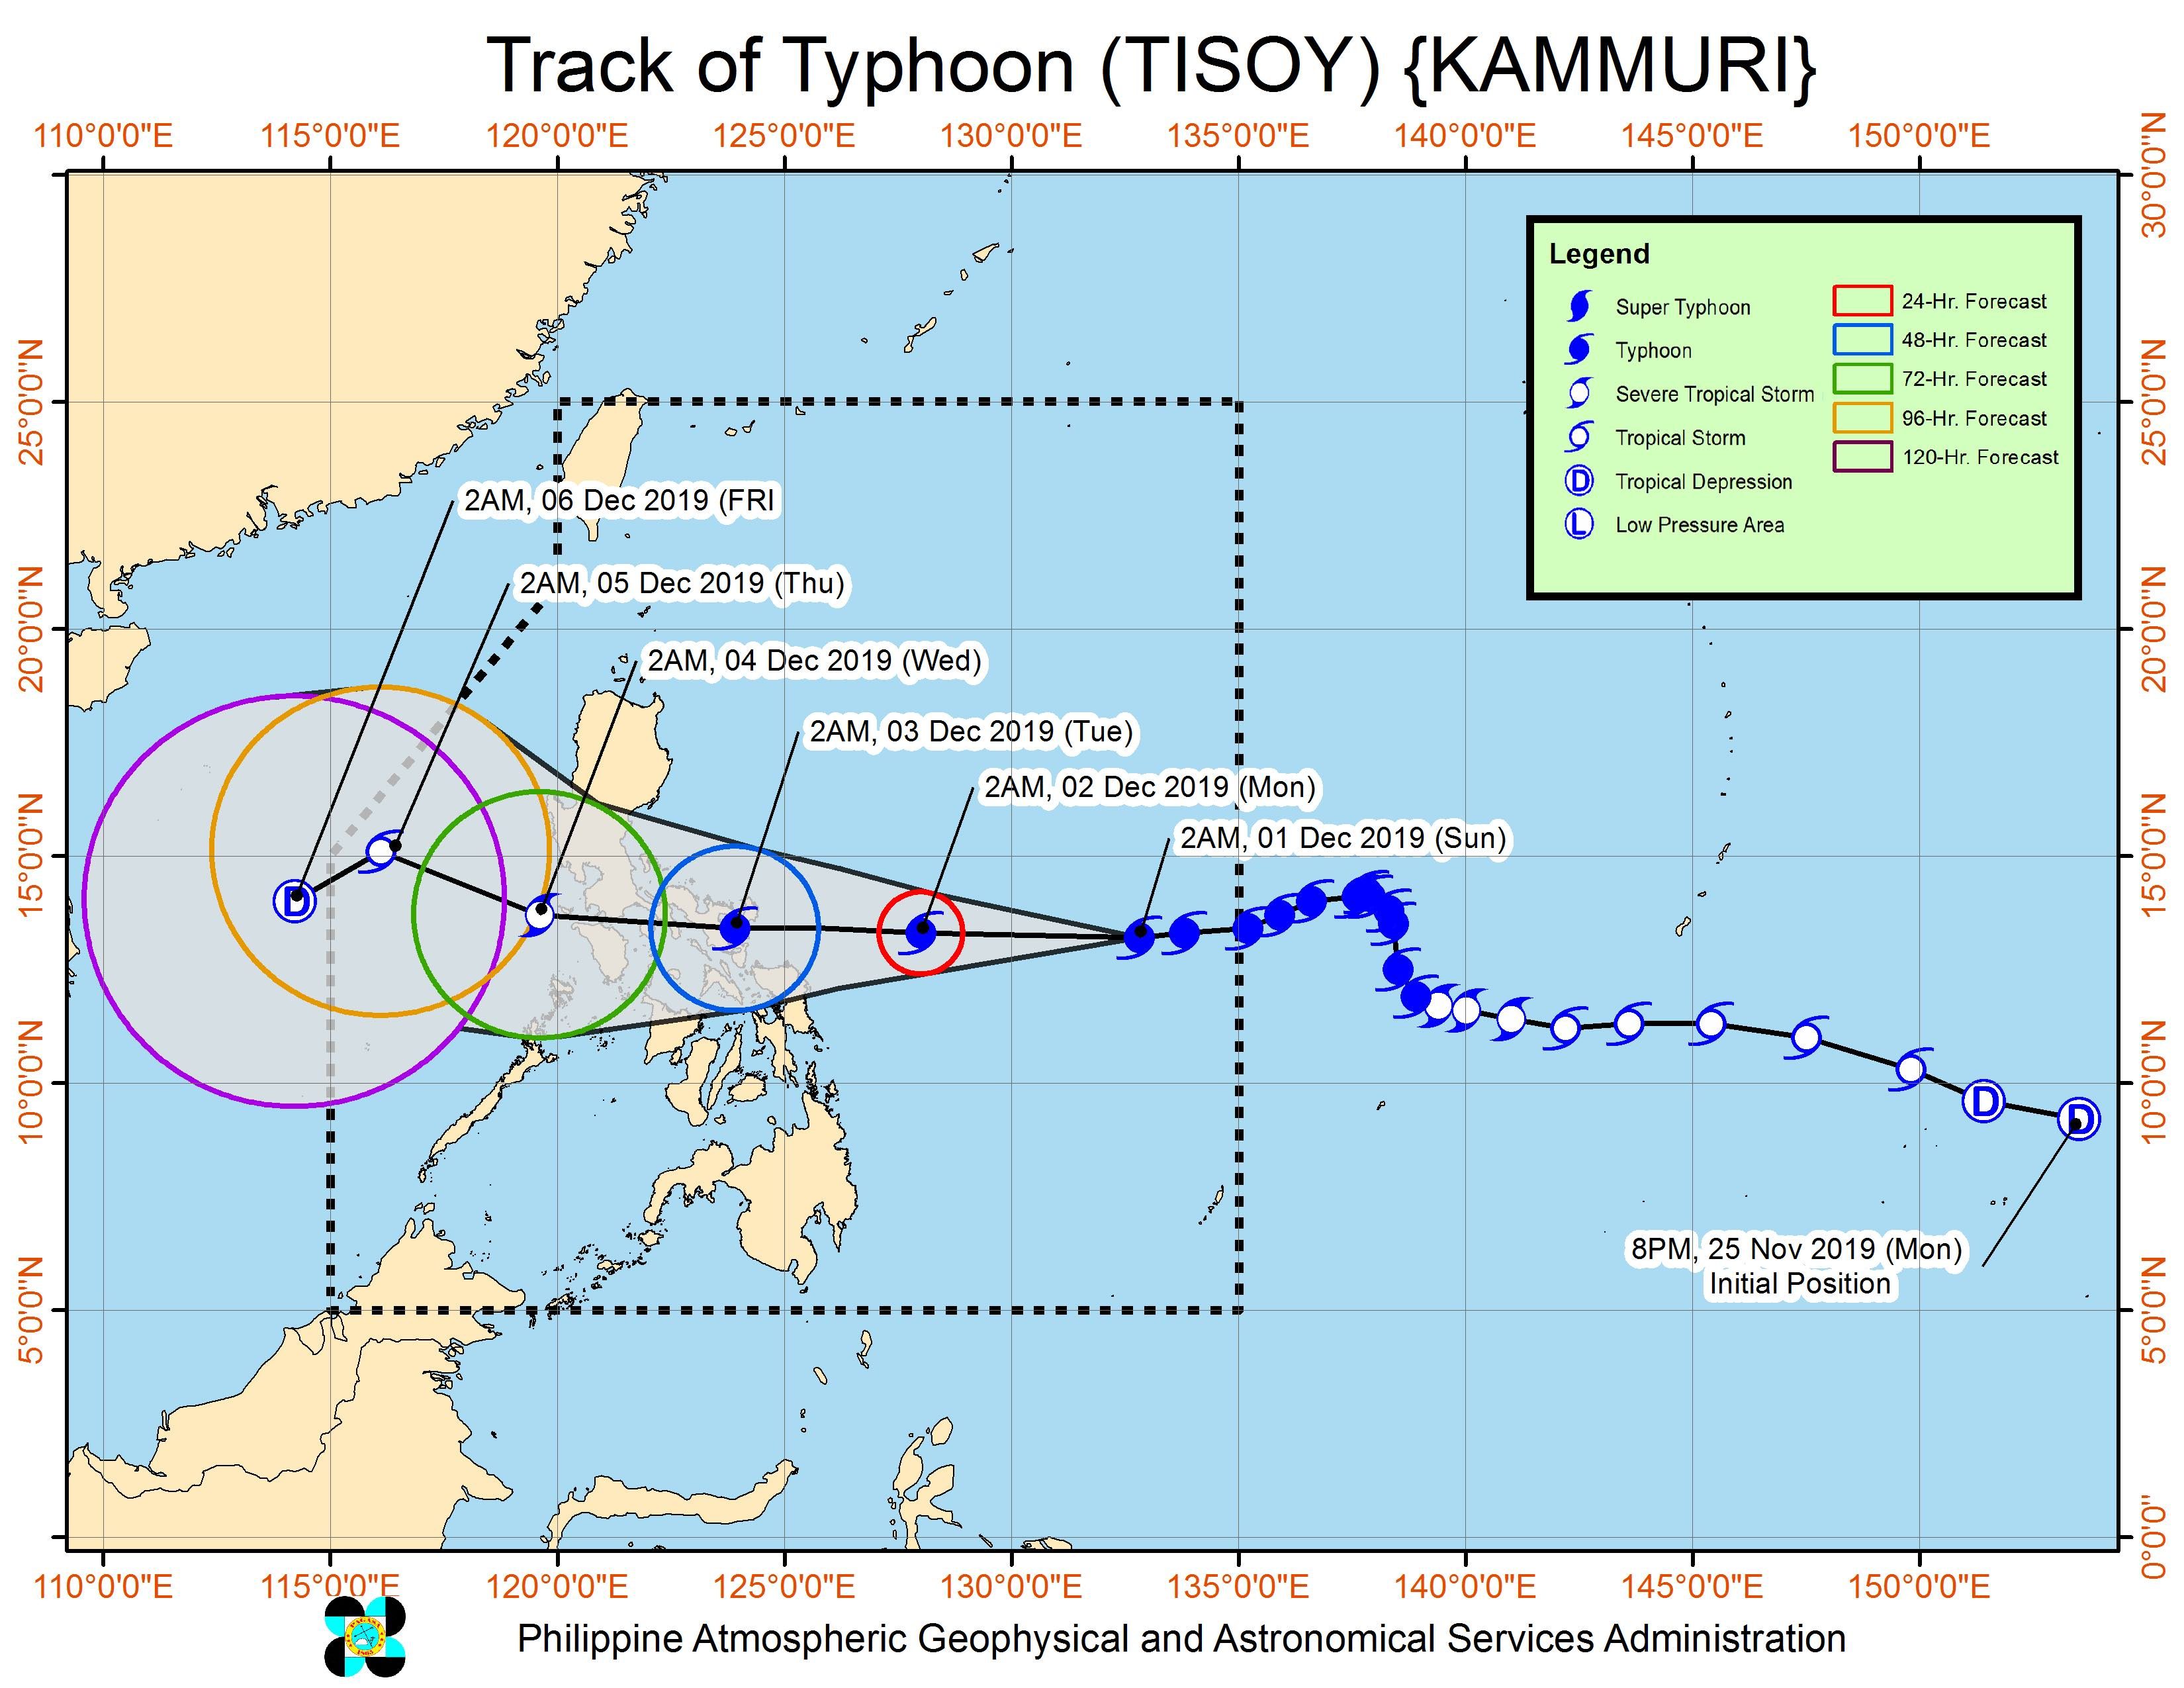 Forecast track of Typhoon Tisoy (Kammuri) as of December 1, 2019, 5 am. Image from PAGASA 